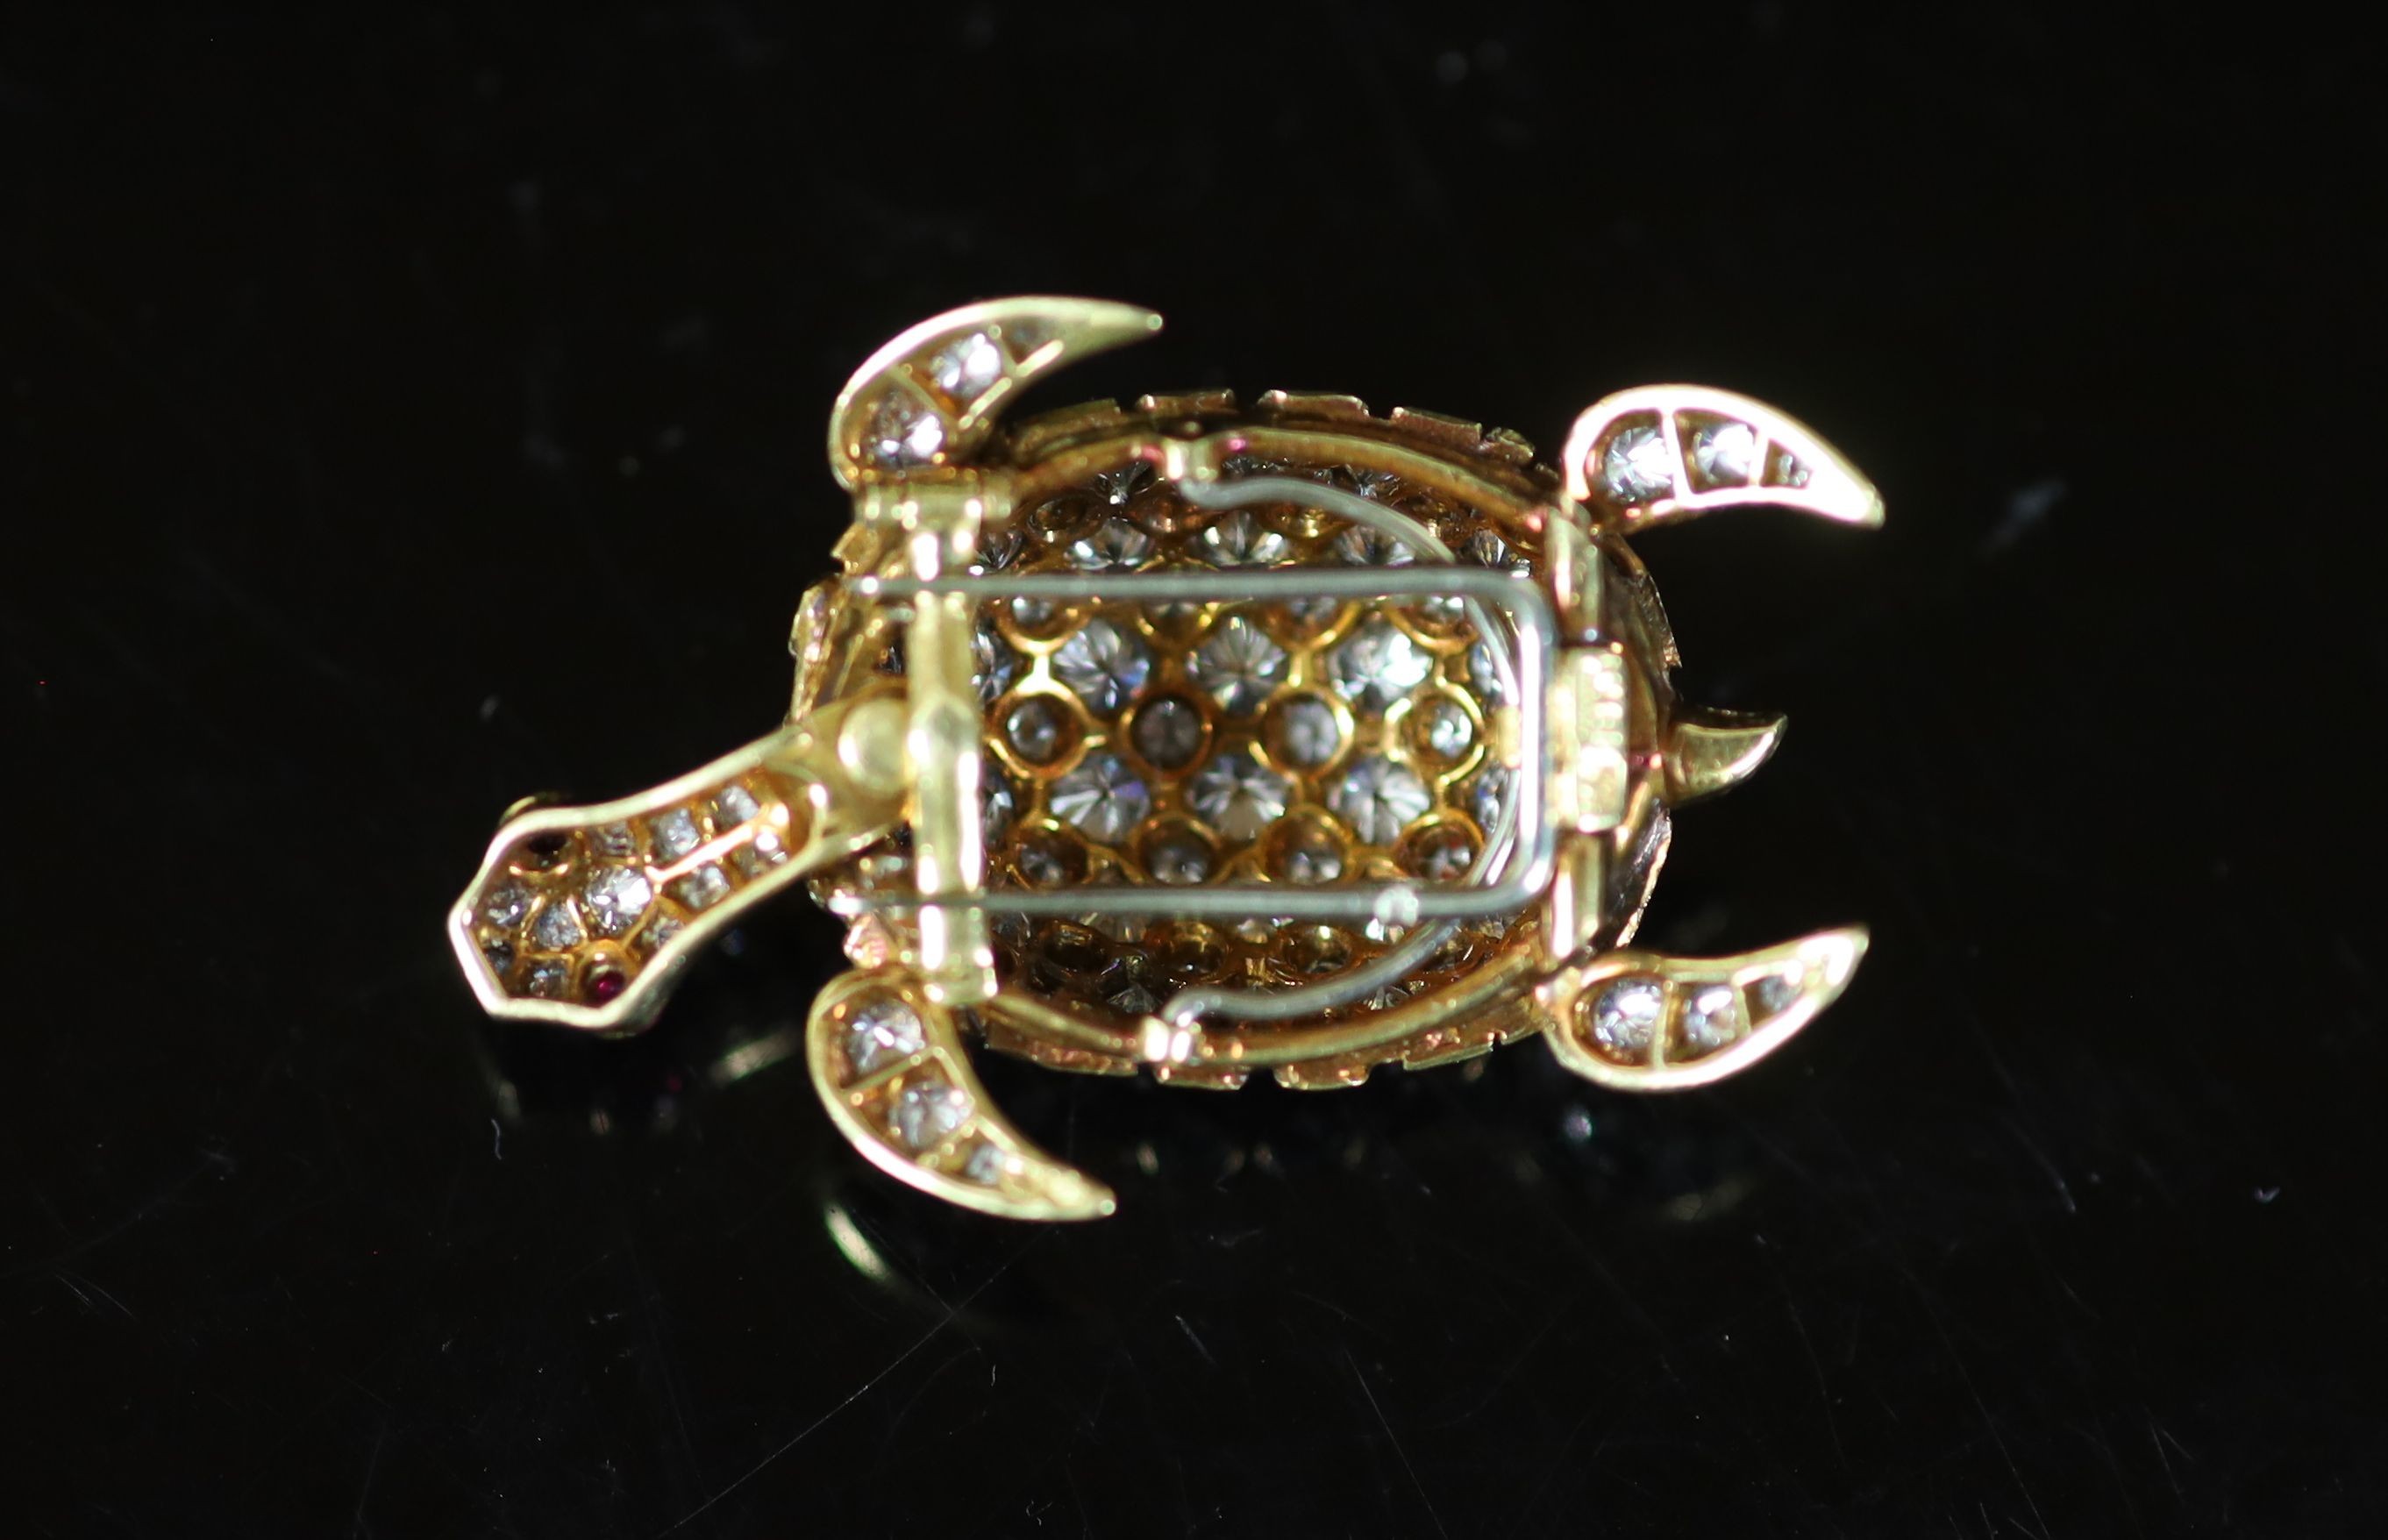 A mid to late 20th century French 18kt gold and pave set diamond clip brooch, modelled as a turtle